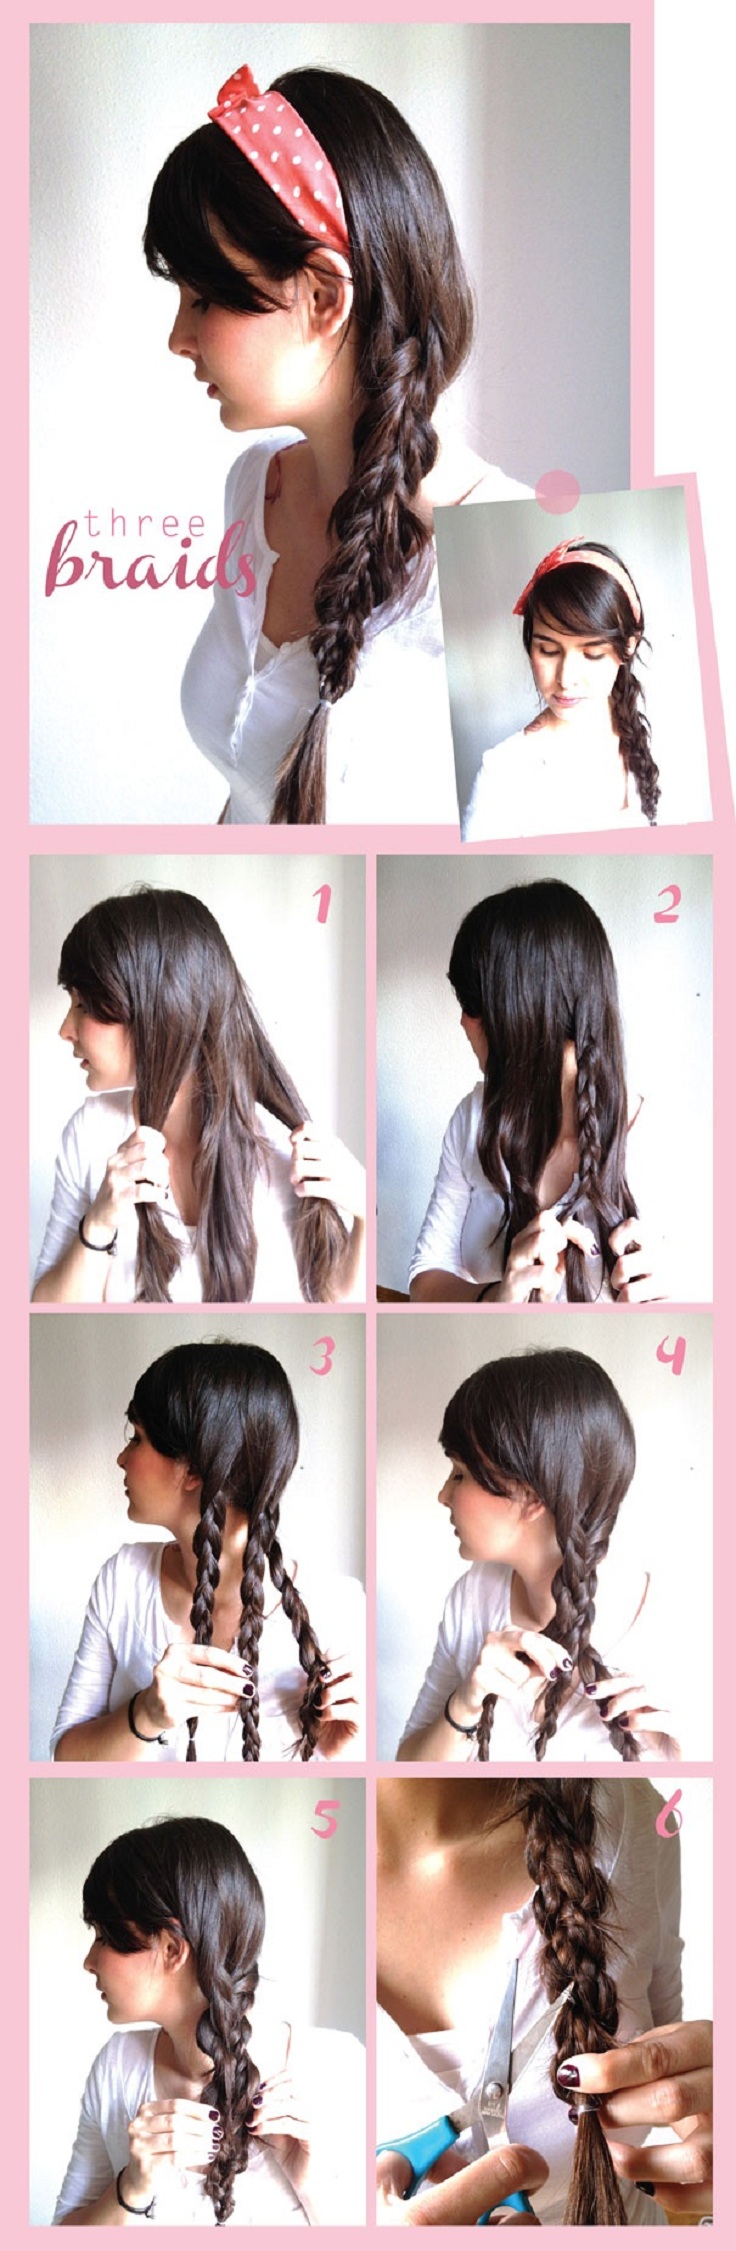 Top 10 Hair Braid Tutorials - Easy To Be Done